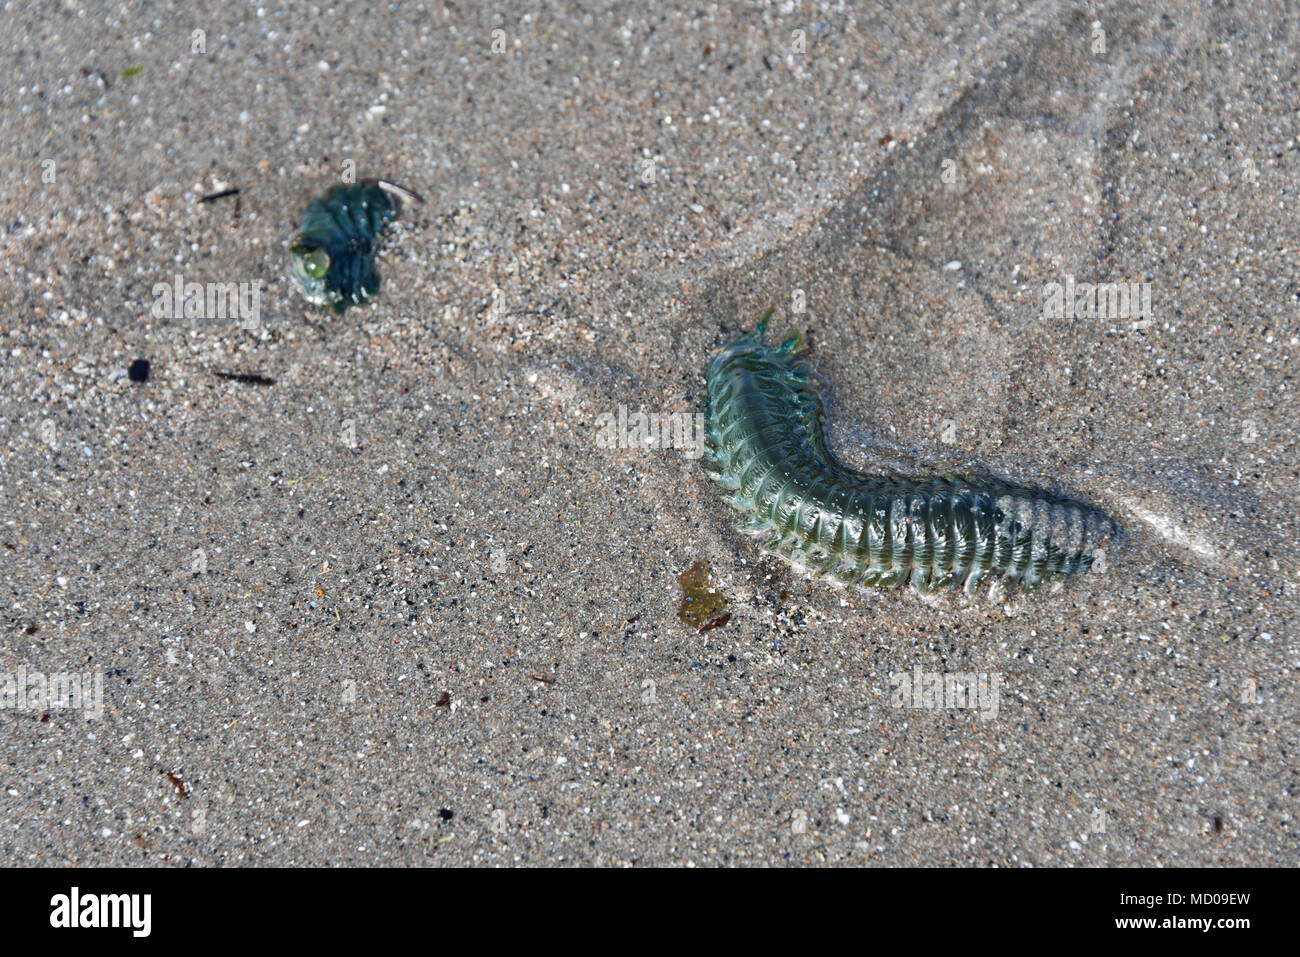 Clamworm (Nereis virens), burrowing into sand at low tide, Bracy Cove, Seal Harbor, Maine, USA Stock Photo